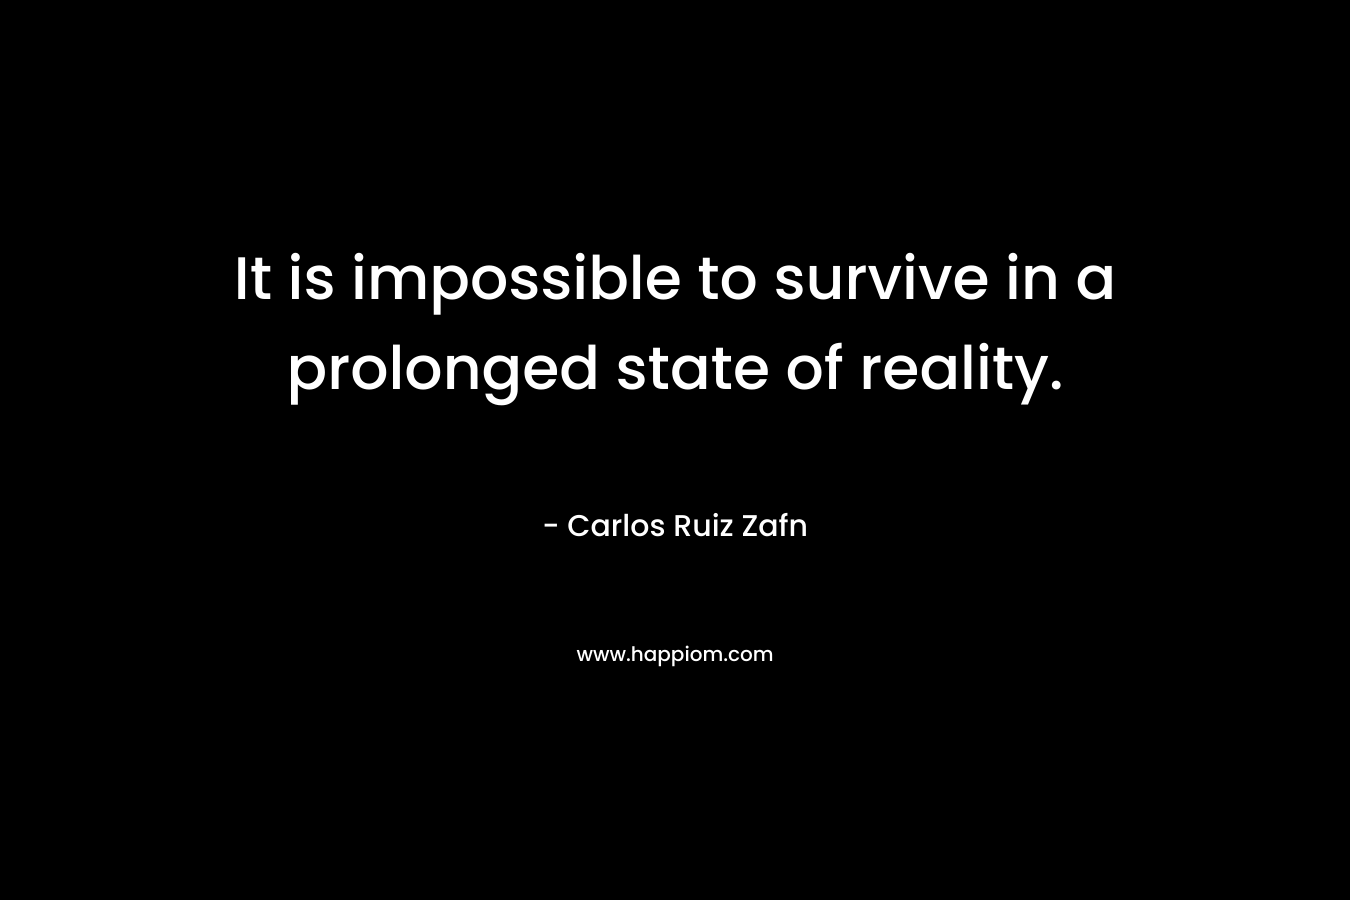 It is impossible to survive in a prolonged state of reality.